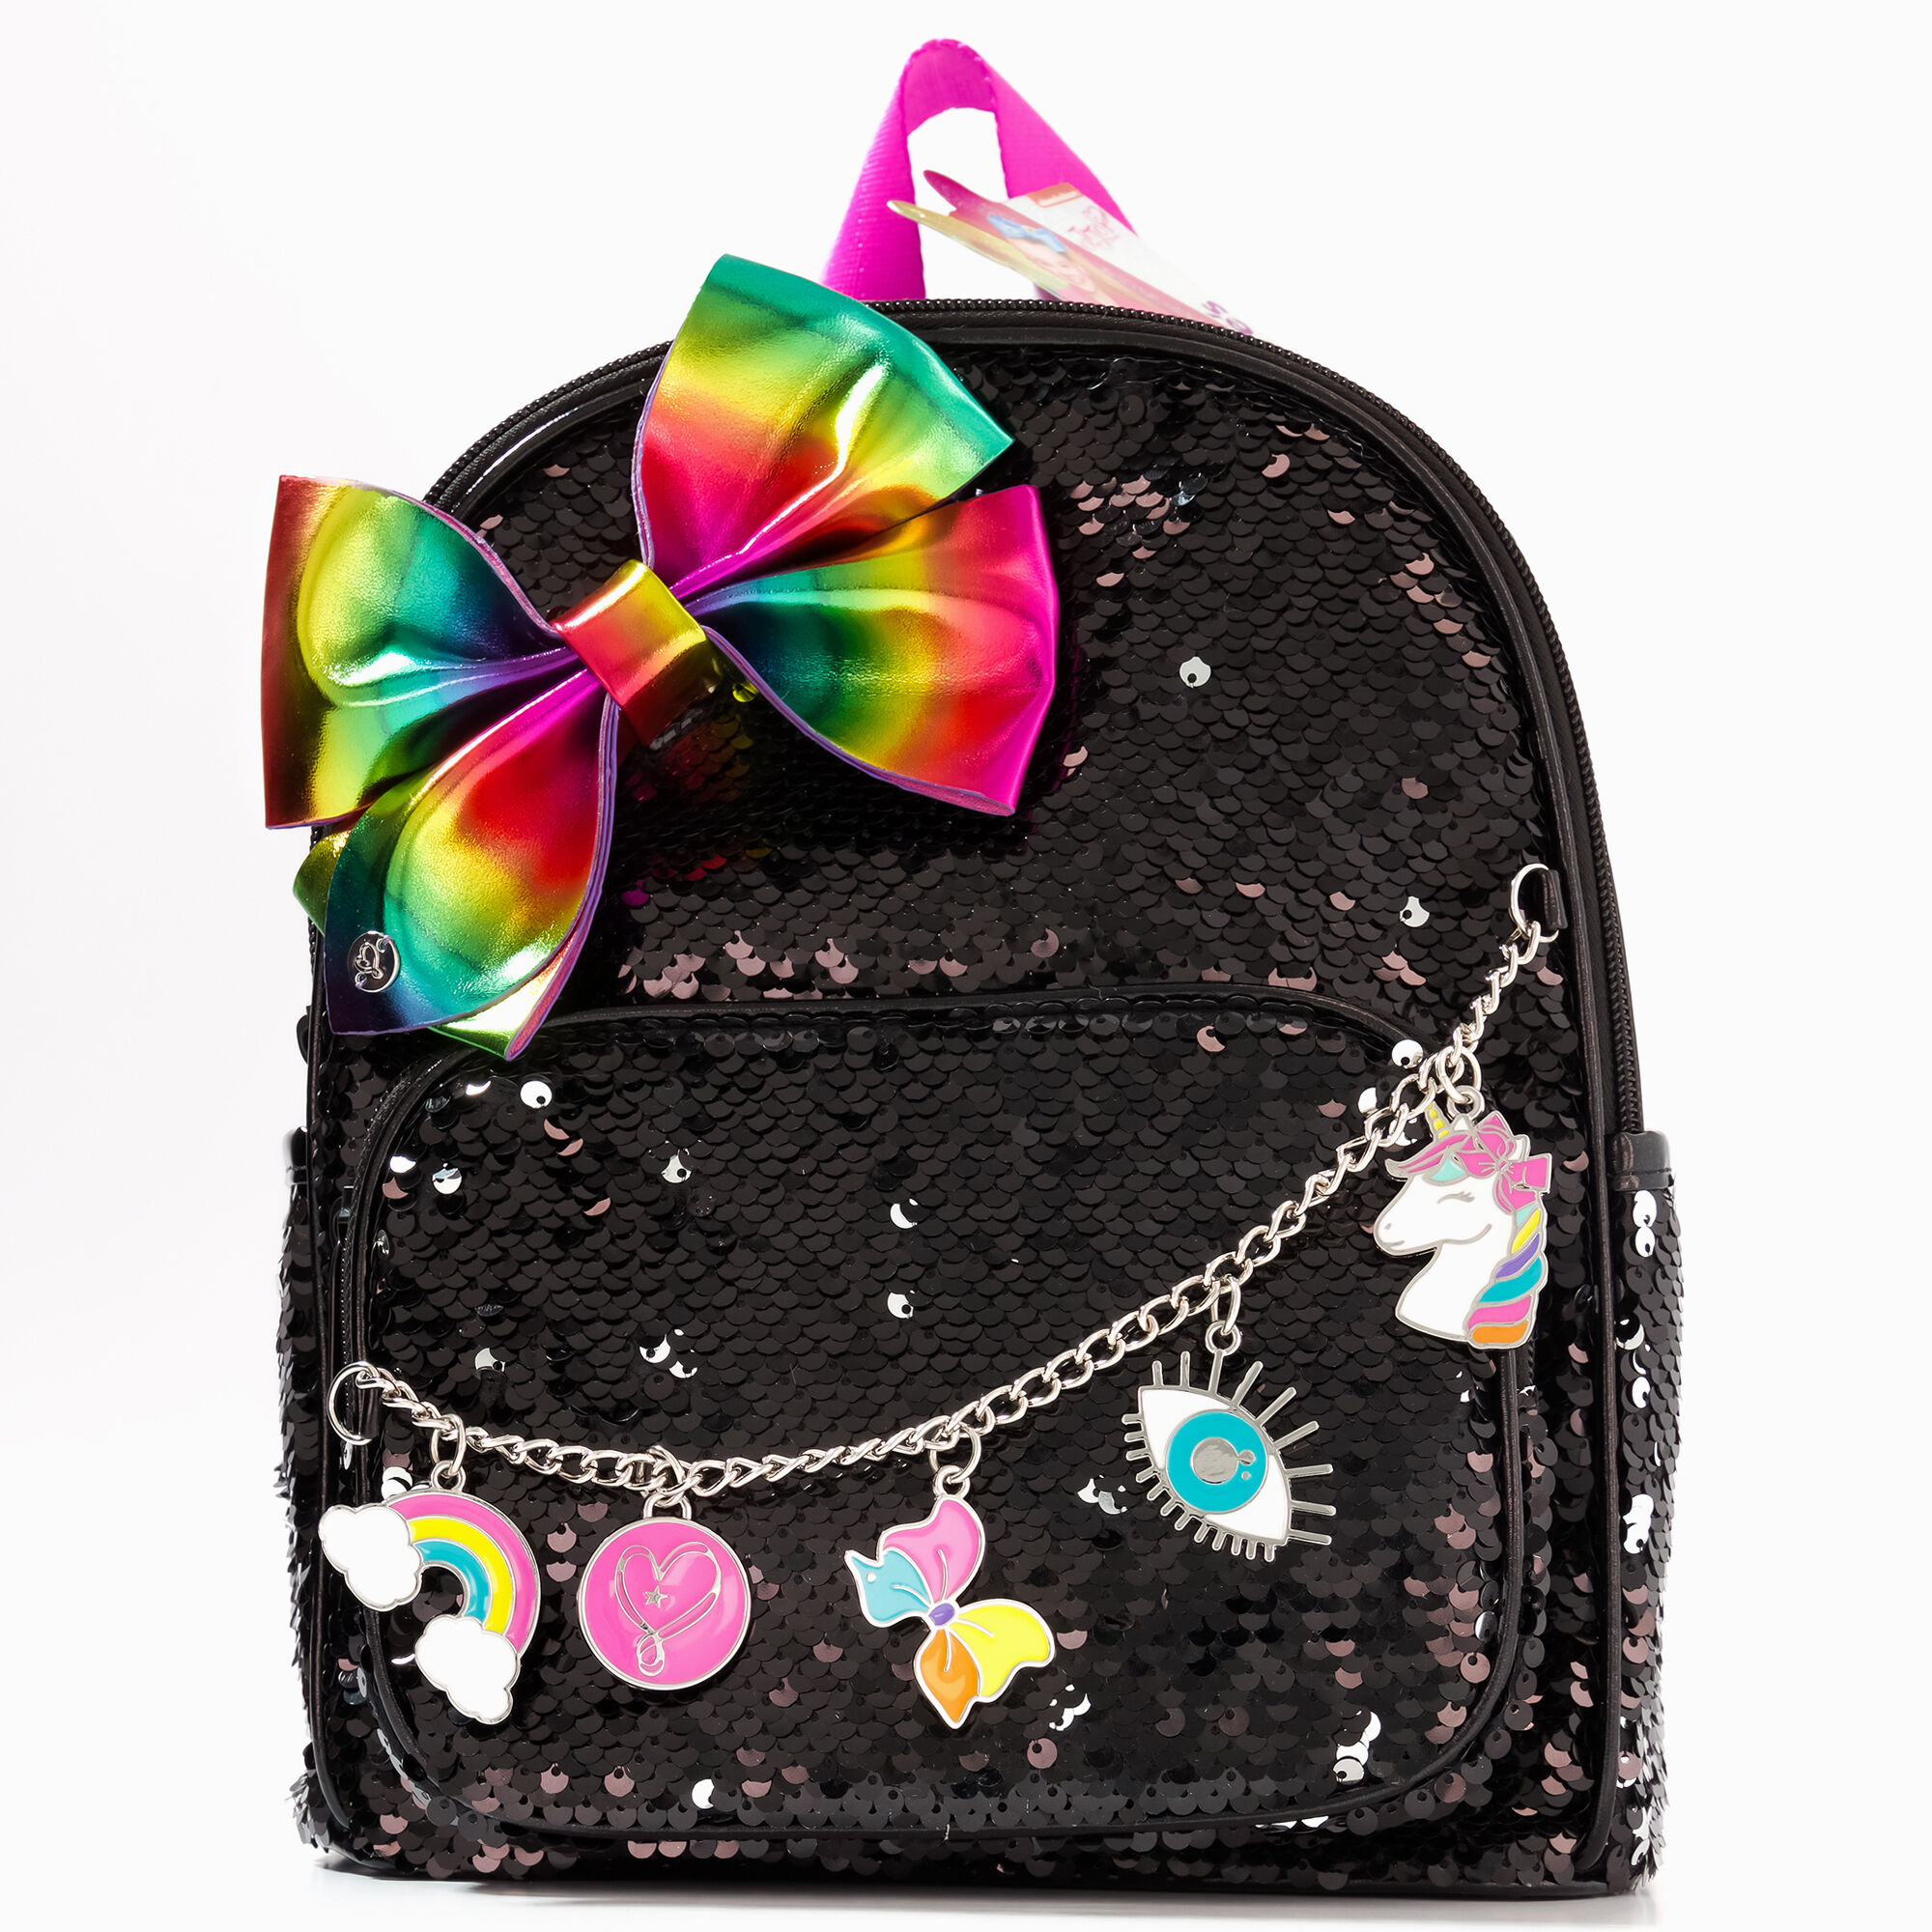 View Claires Jojo Siwa Sequins Small Backpack Black information